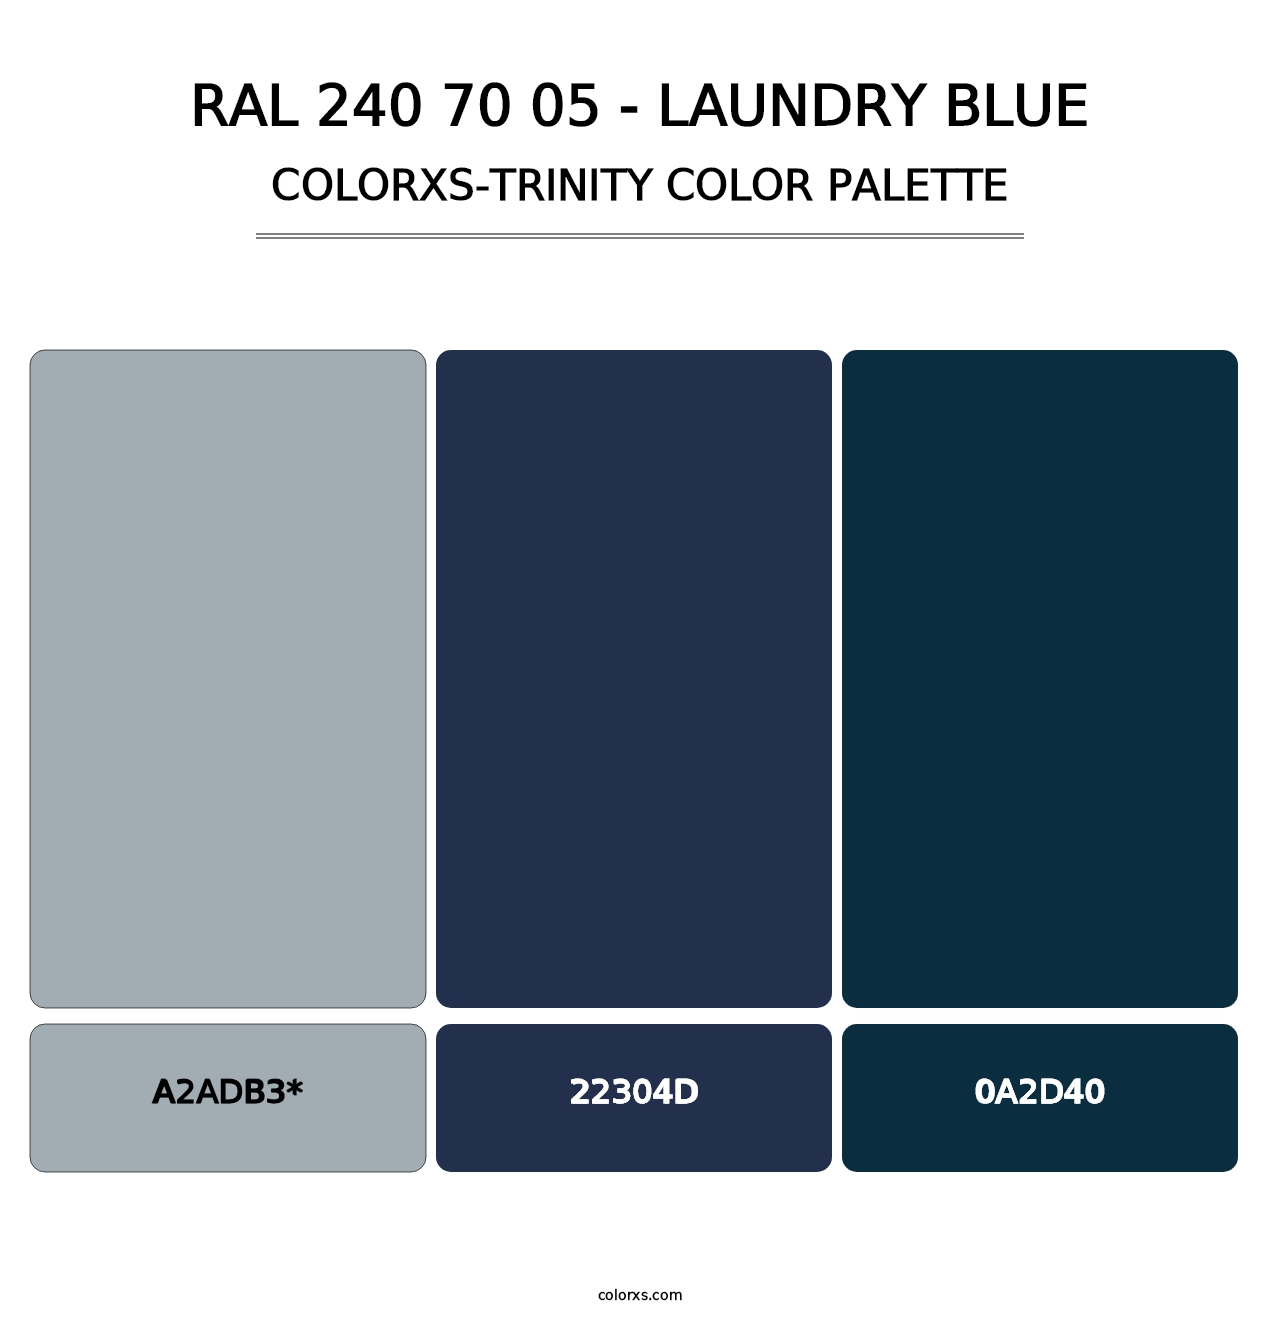 RAL 240 70 05 - Laundry Blue - Colorxs Trinity Palette